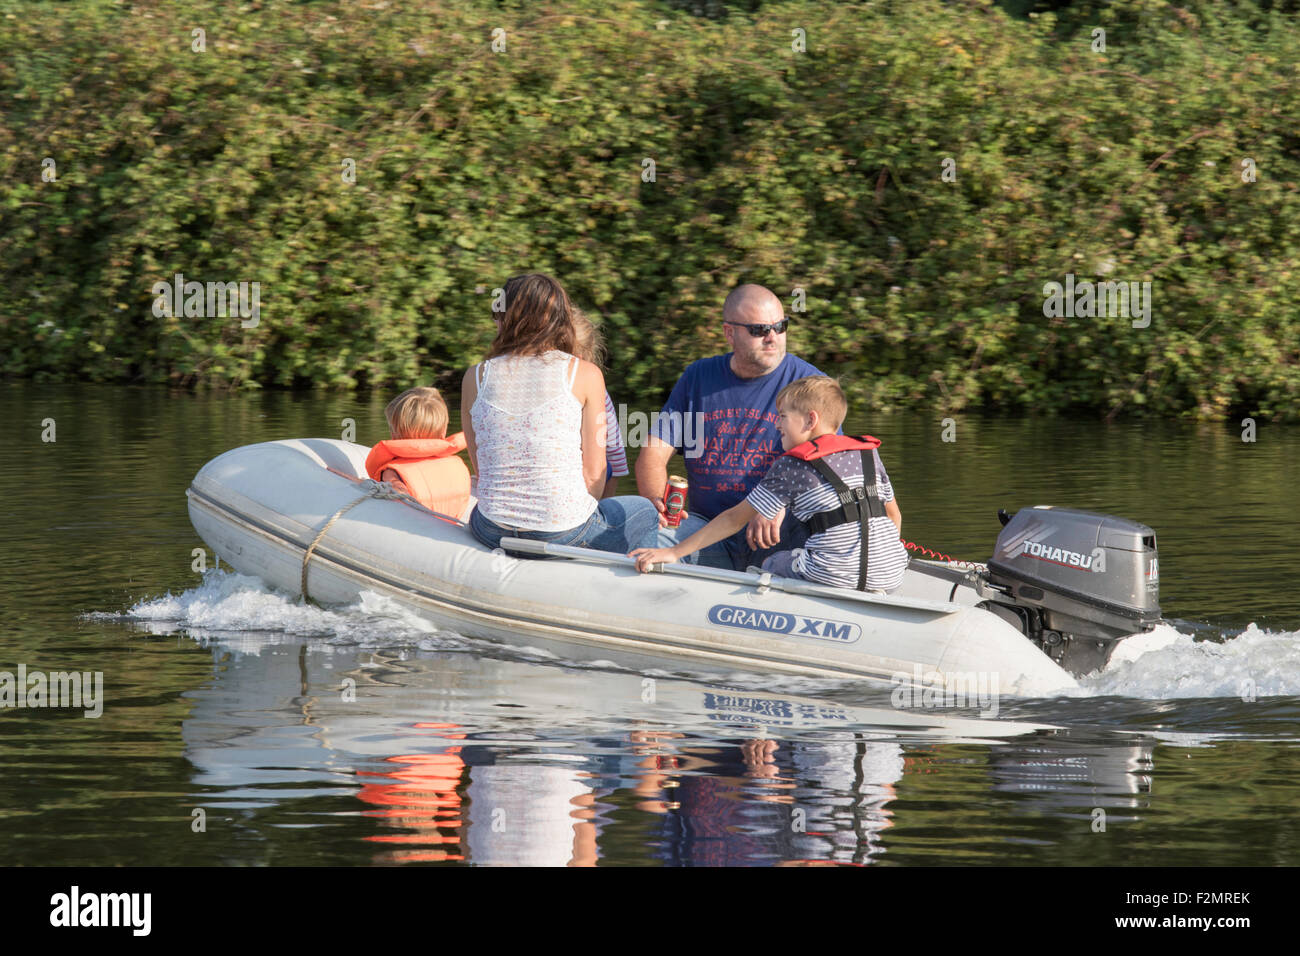 Family day out on a inflatable boat with the children wearing life jackets, England, UK Stock Photo